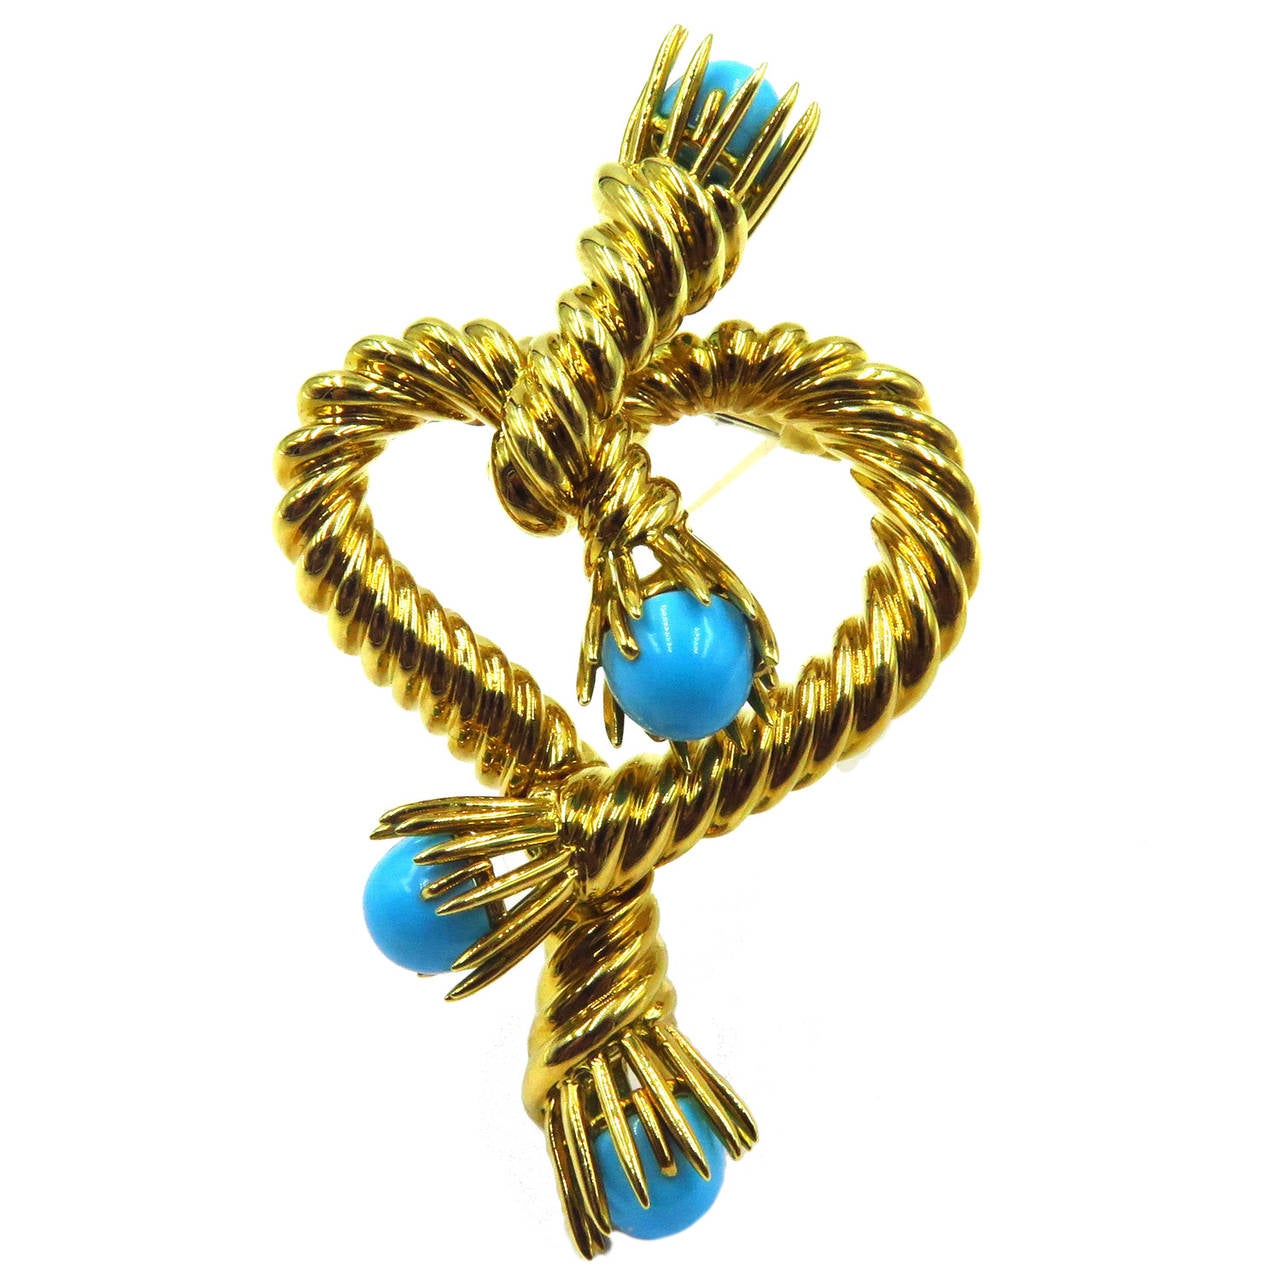  Tiffany & Co. Schlumberger Turquoise Gold Roped Heart Design Brooch